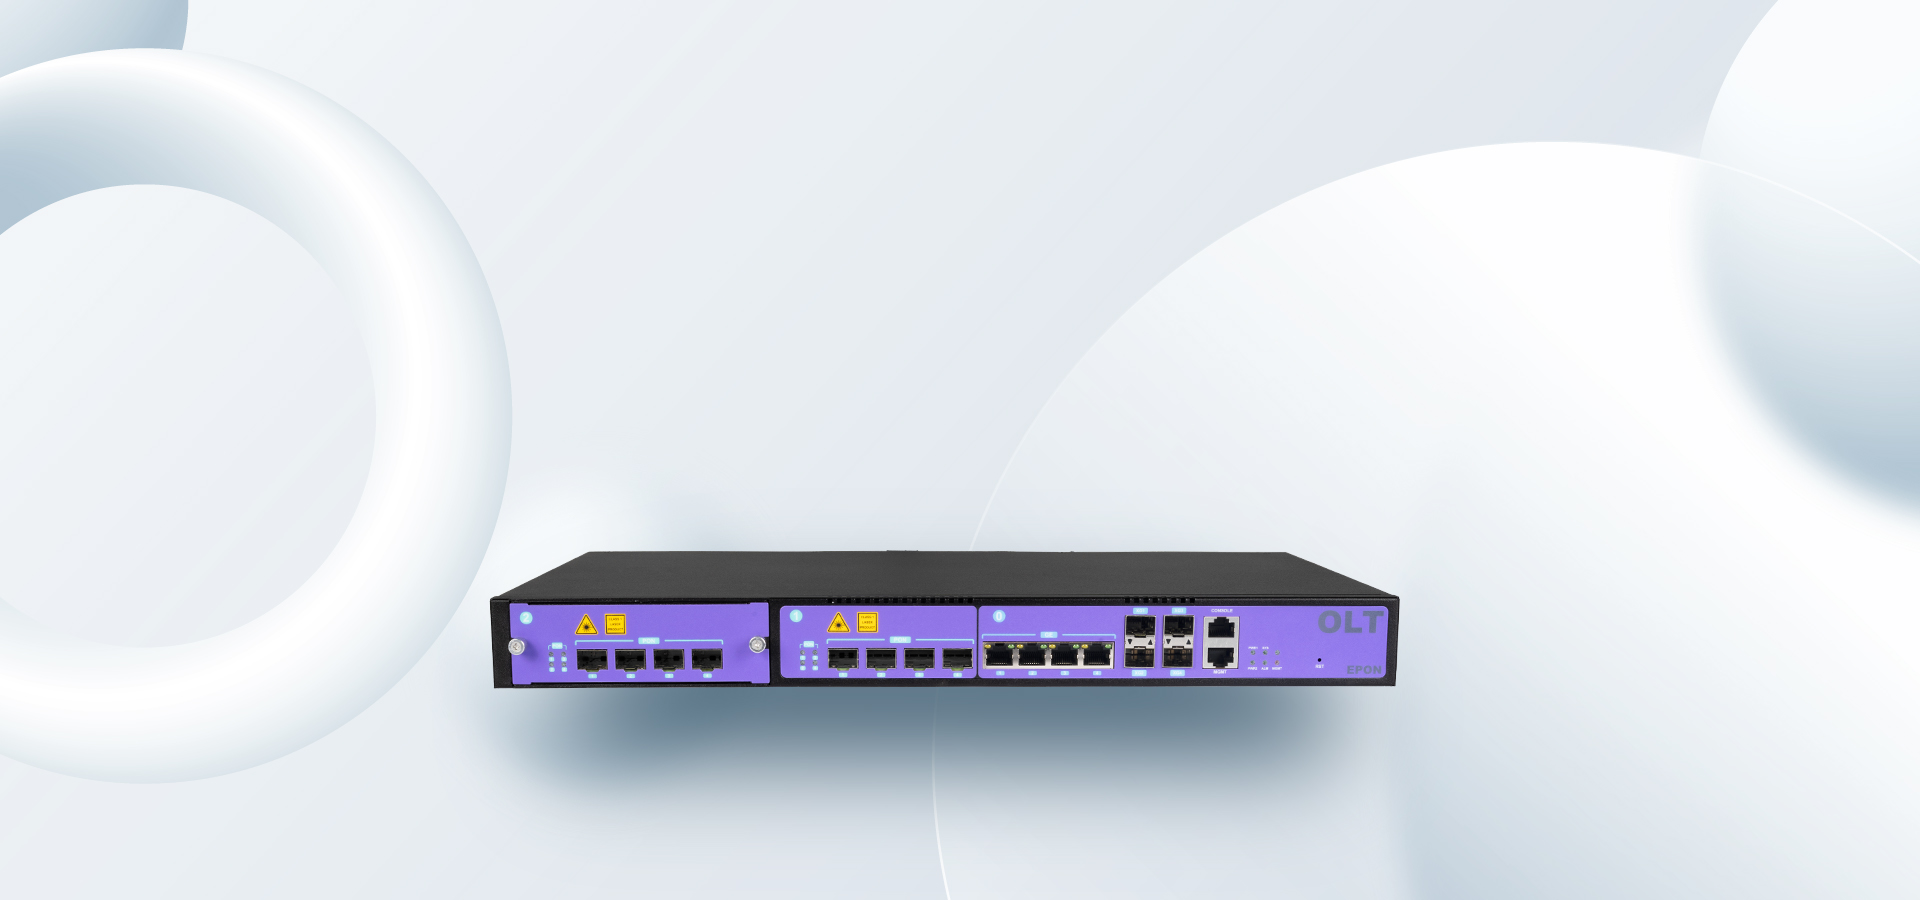 What does an Optical Line Terminal (OLT) do?